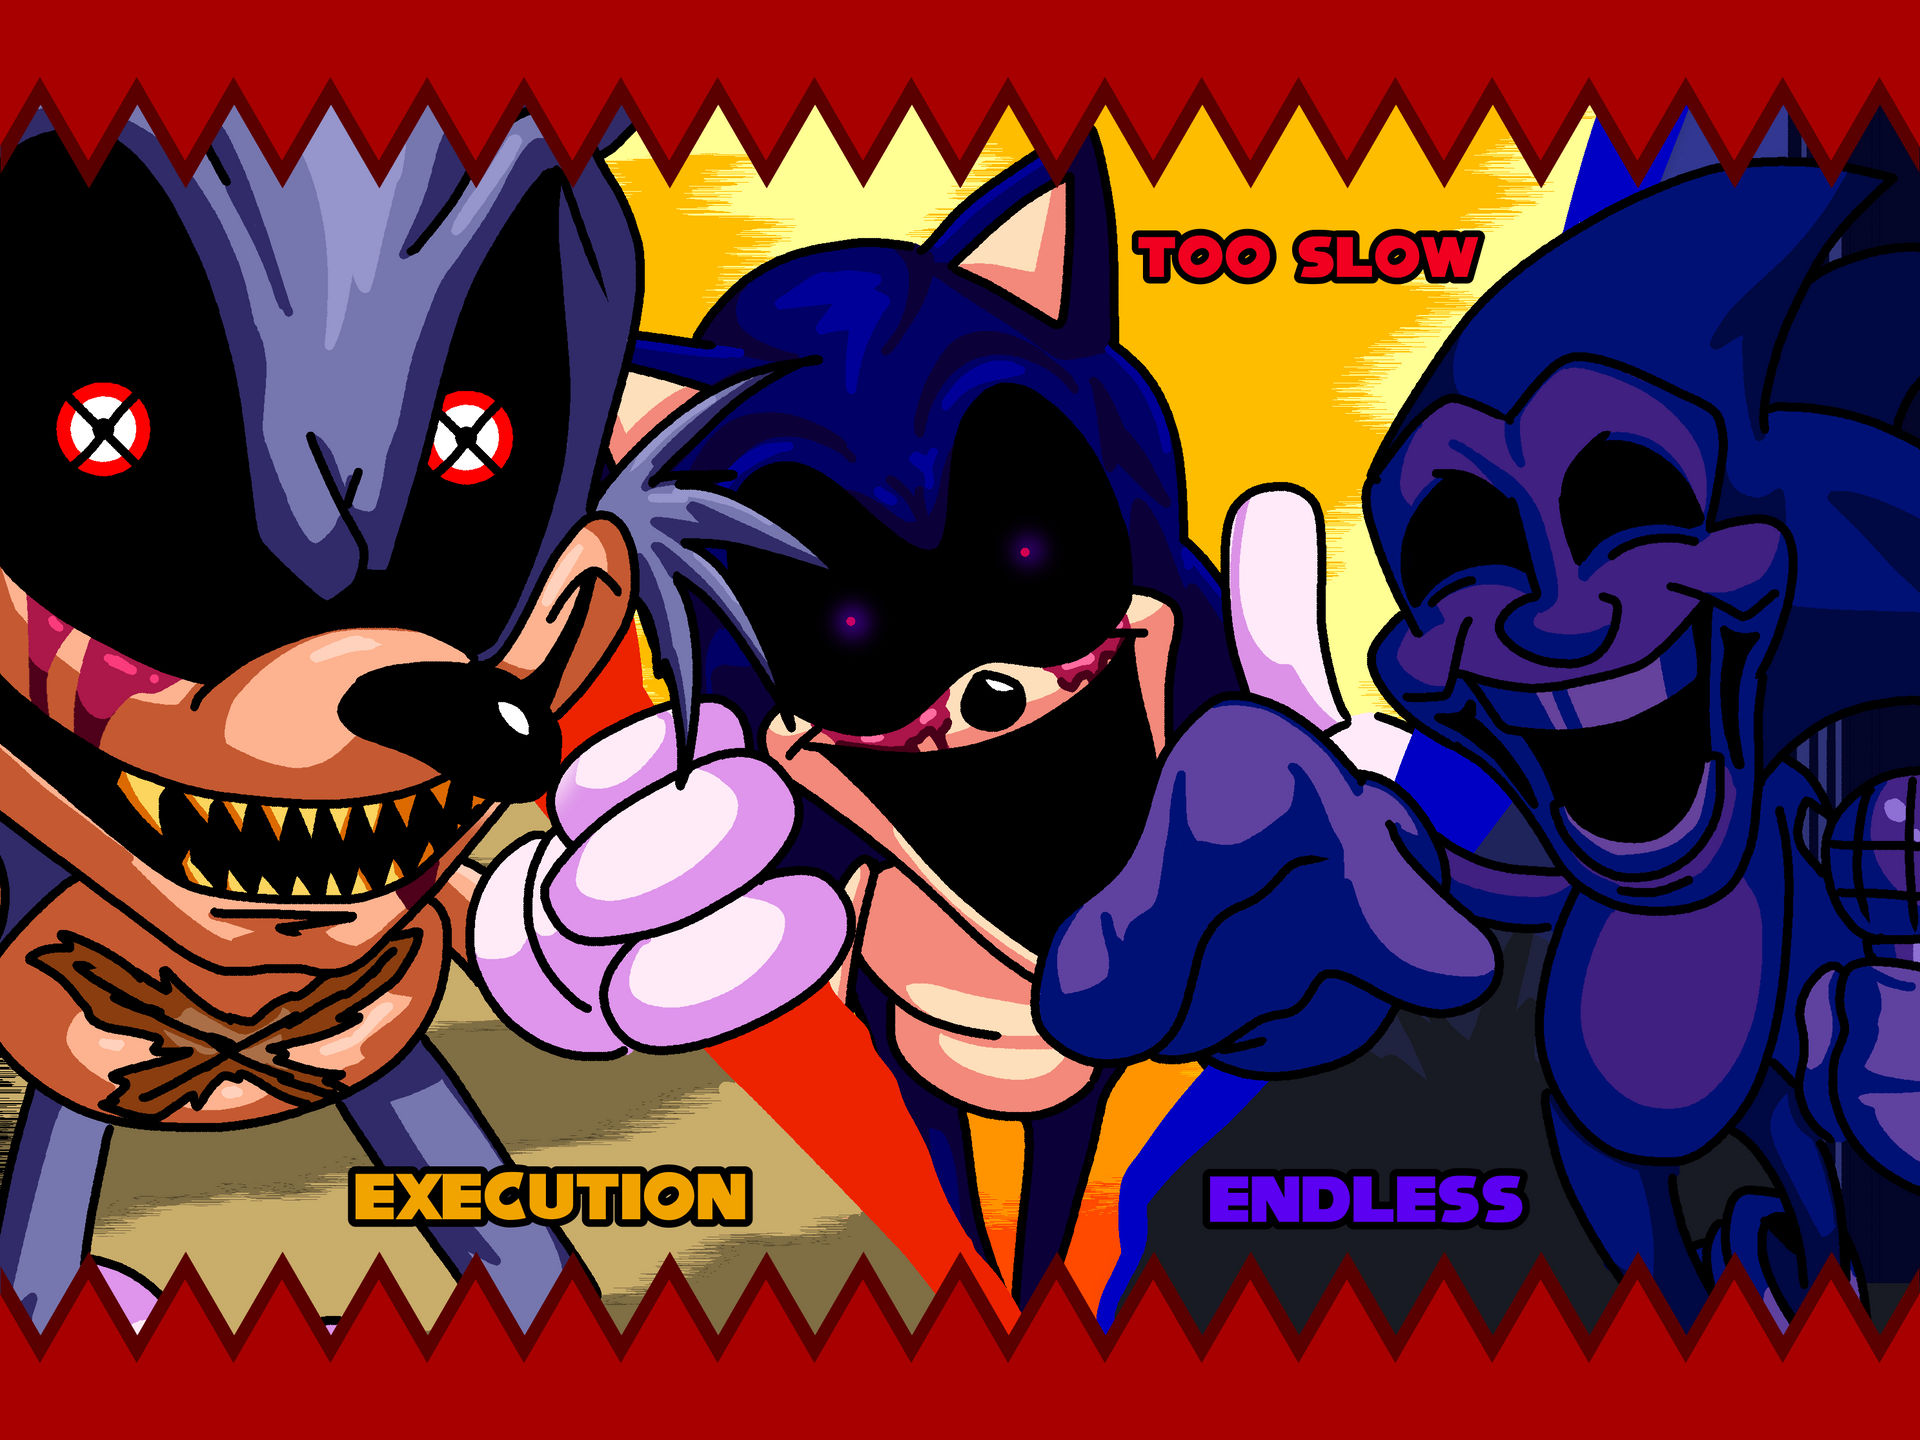 Not So Sonic.exe.. by SilvsSuni on Newgrounds